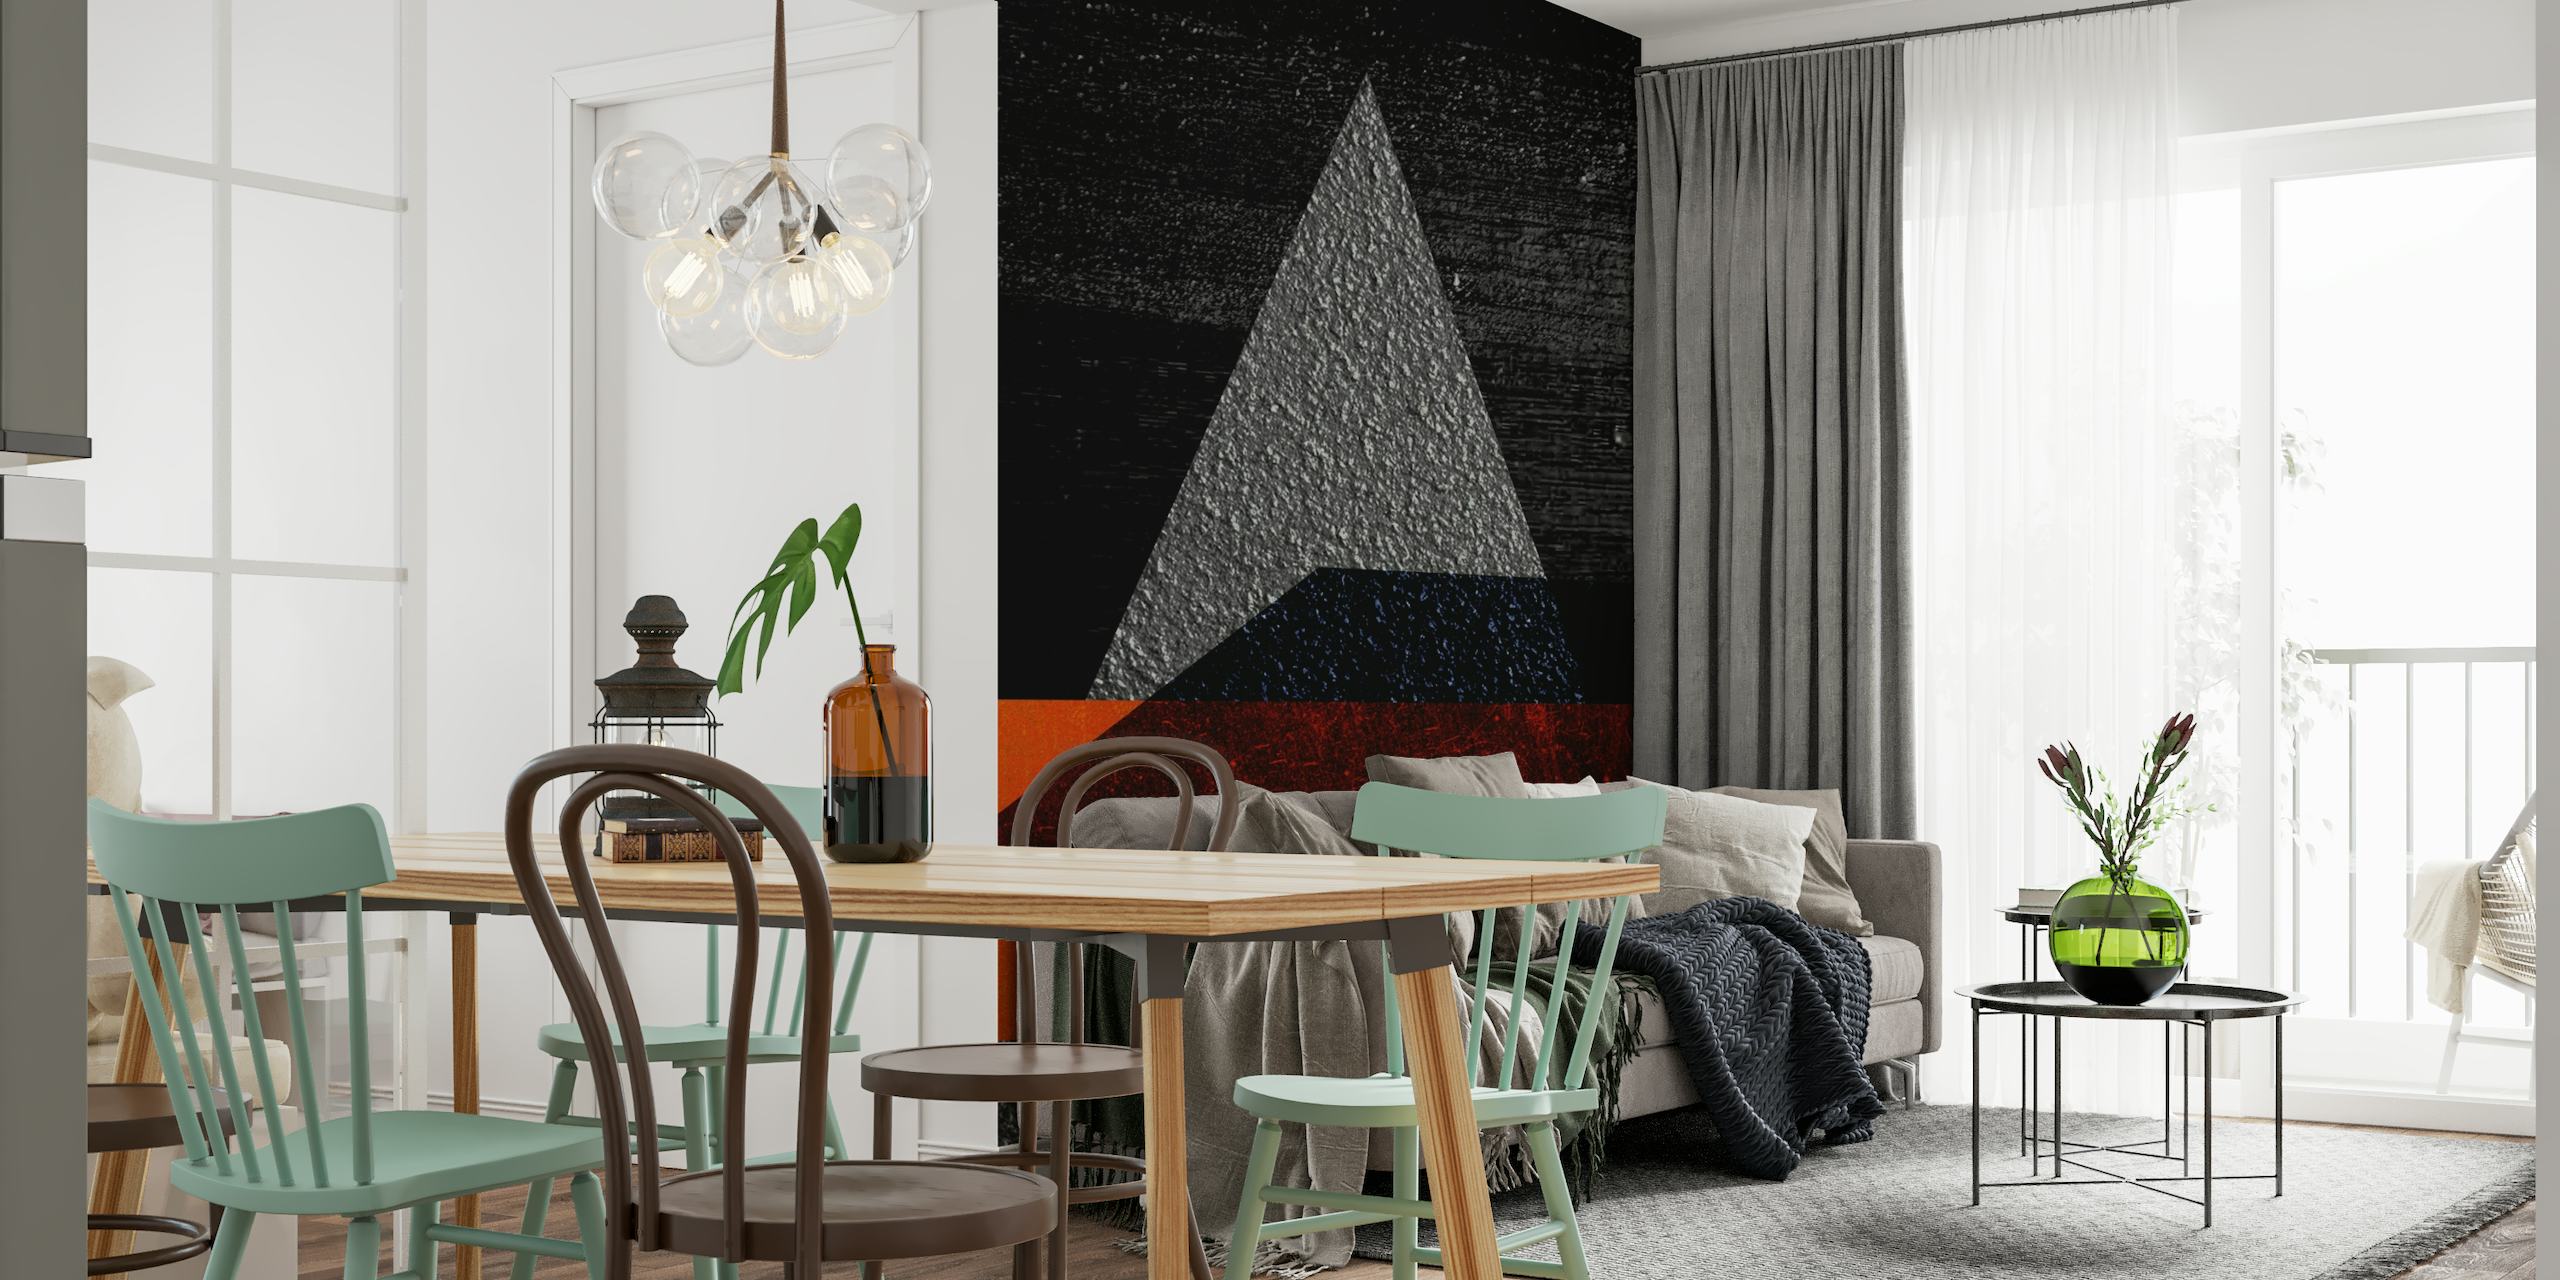 Abstract geometric wall mural with contrasting black background and textured triangles in shades of blue and orange